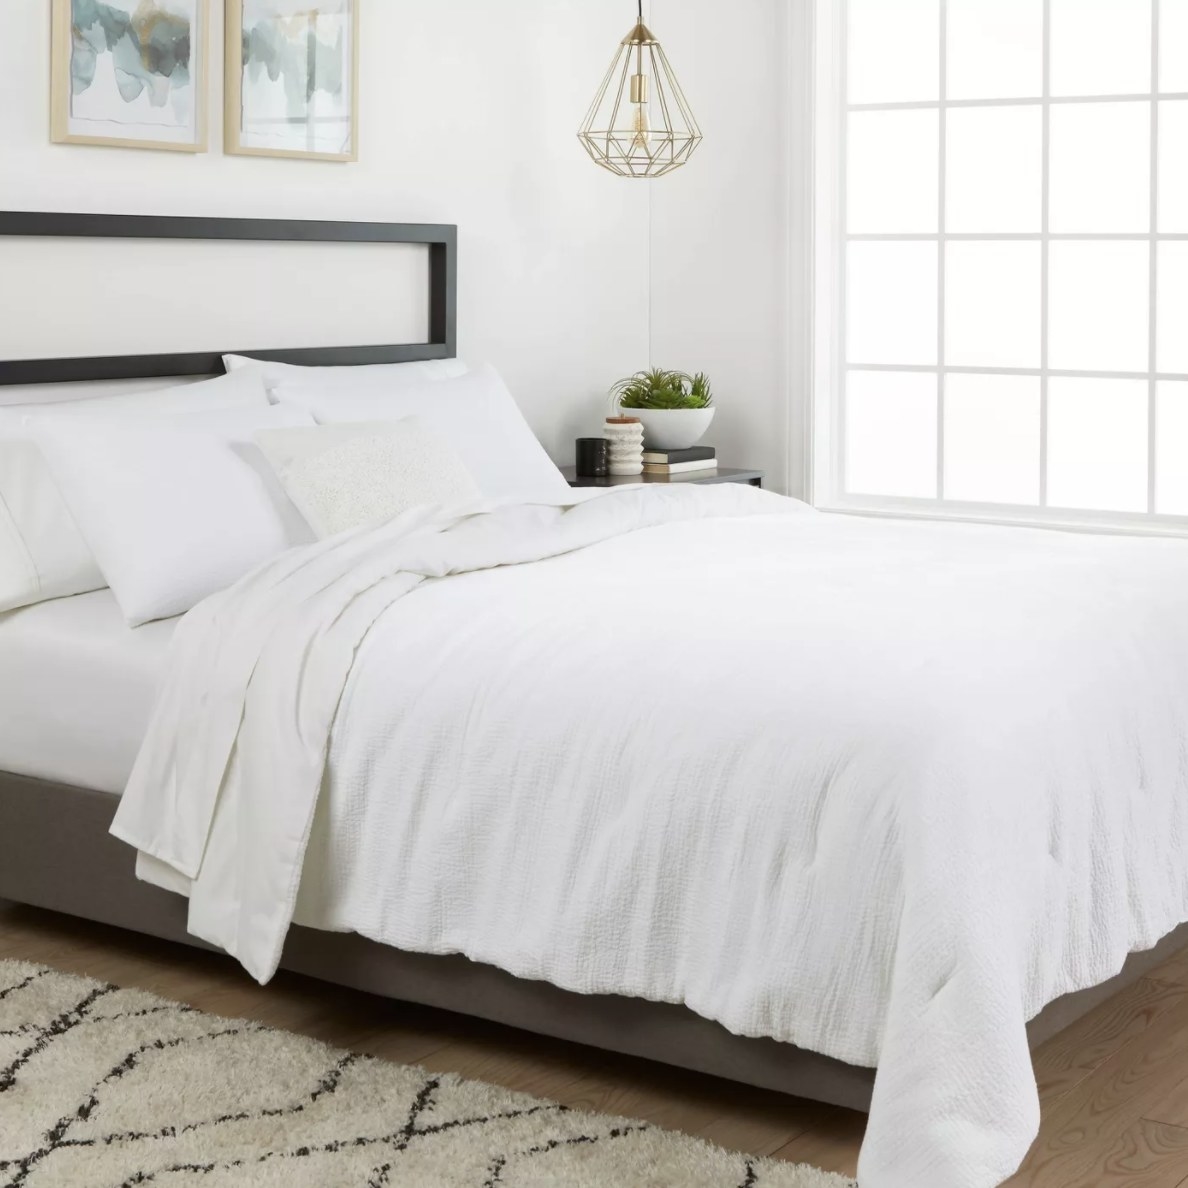 A bright white textured comforter on a black and brown bed frame in a well lit room